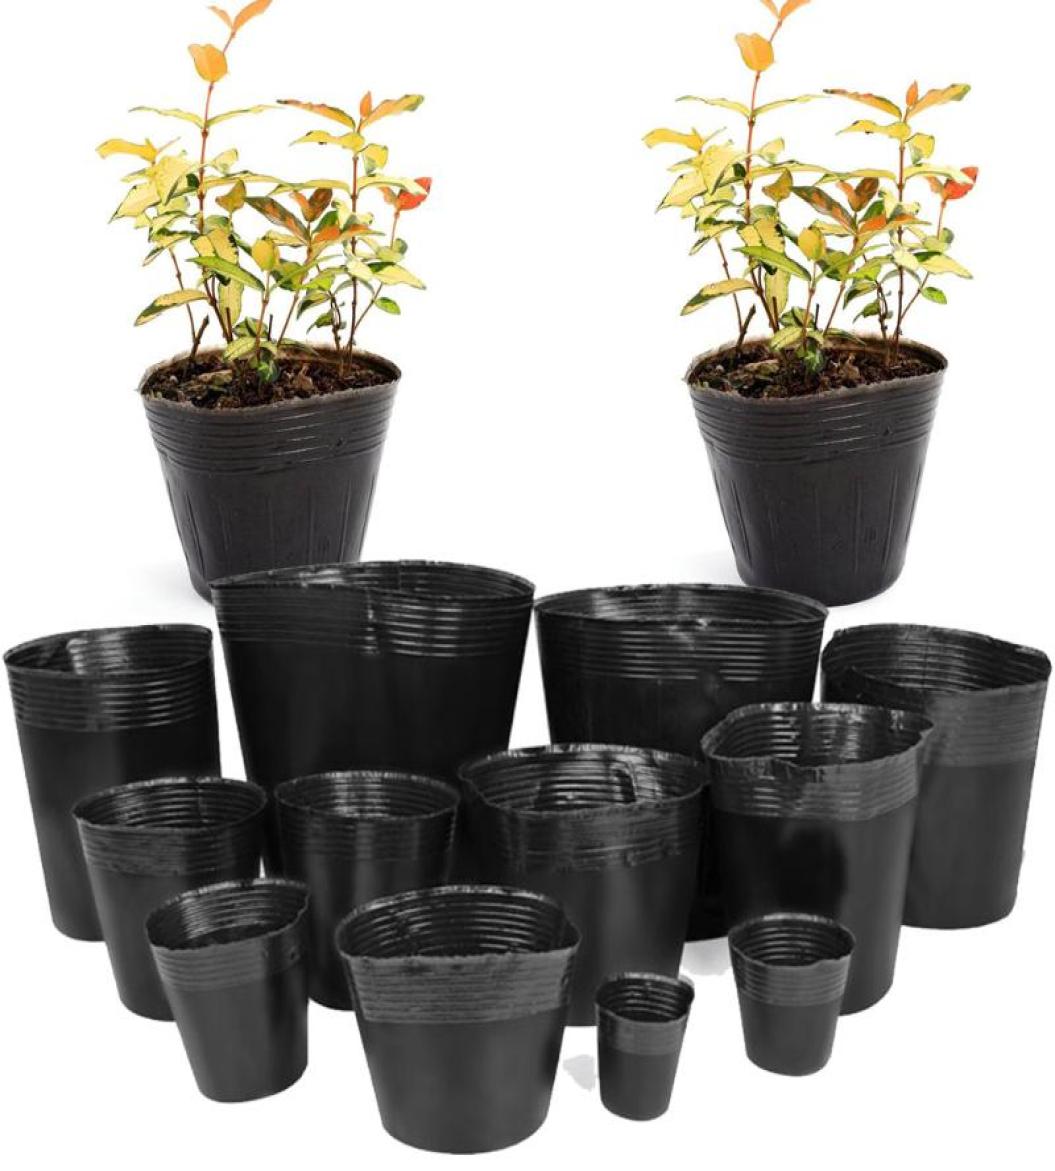 

Planters Pots 20300PCS 15 Sizes Of Plastic Grow Nursery Pot Home Garden Planting Bags For Vegetable Flowers Plant Container Sta7254440